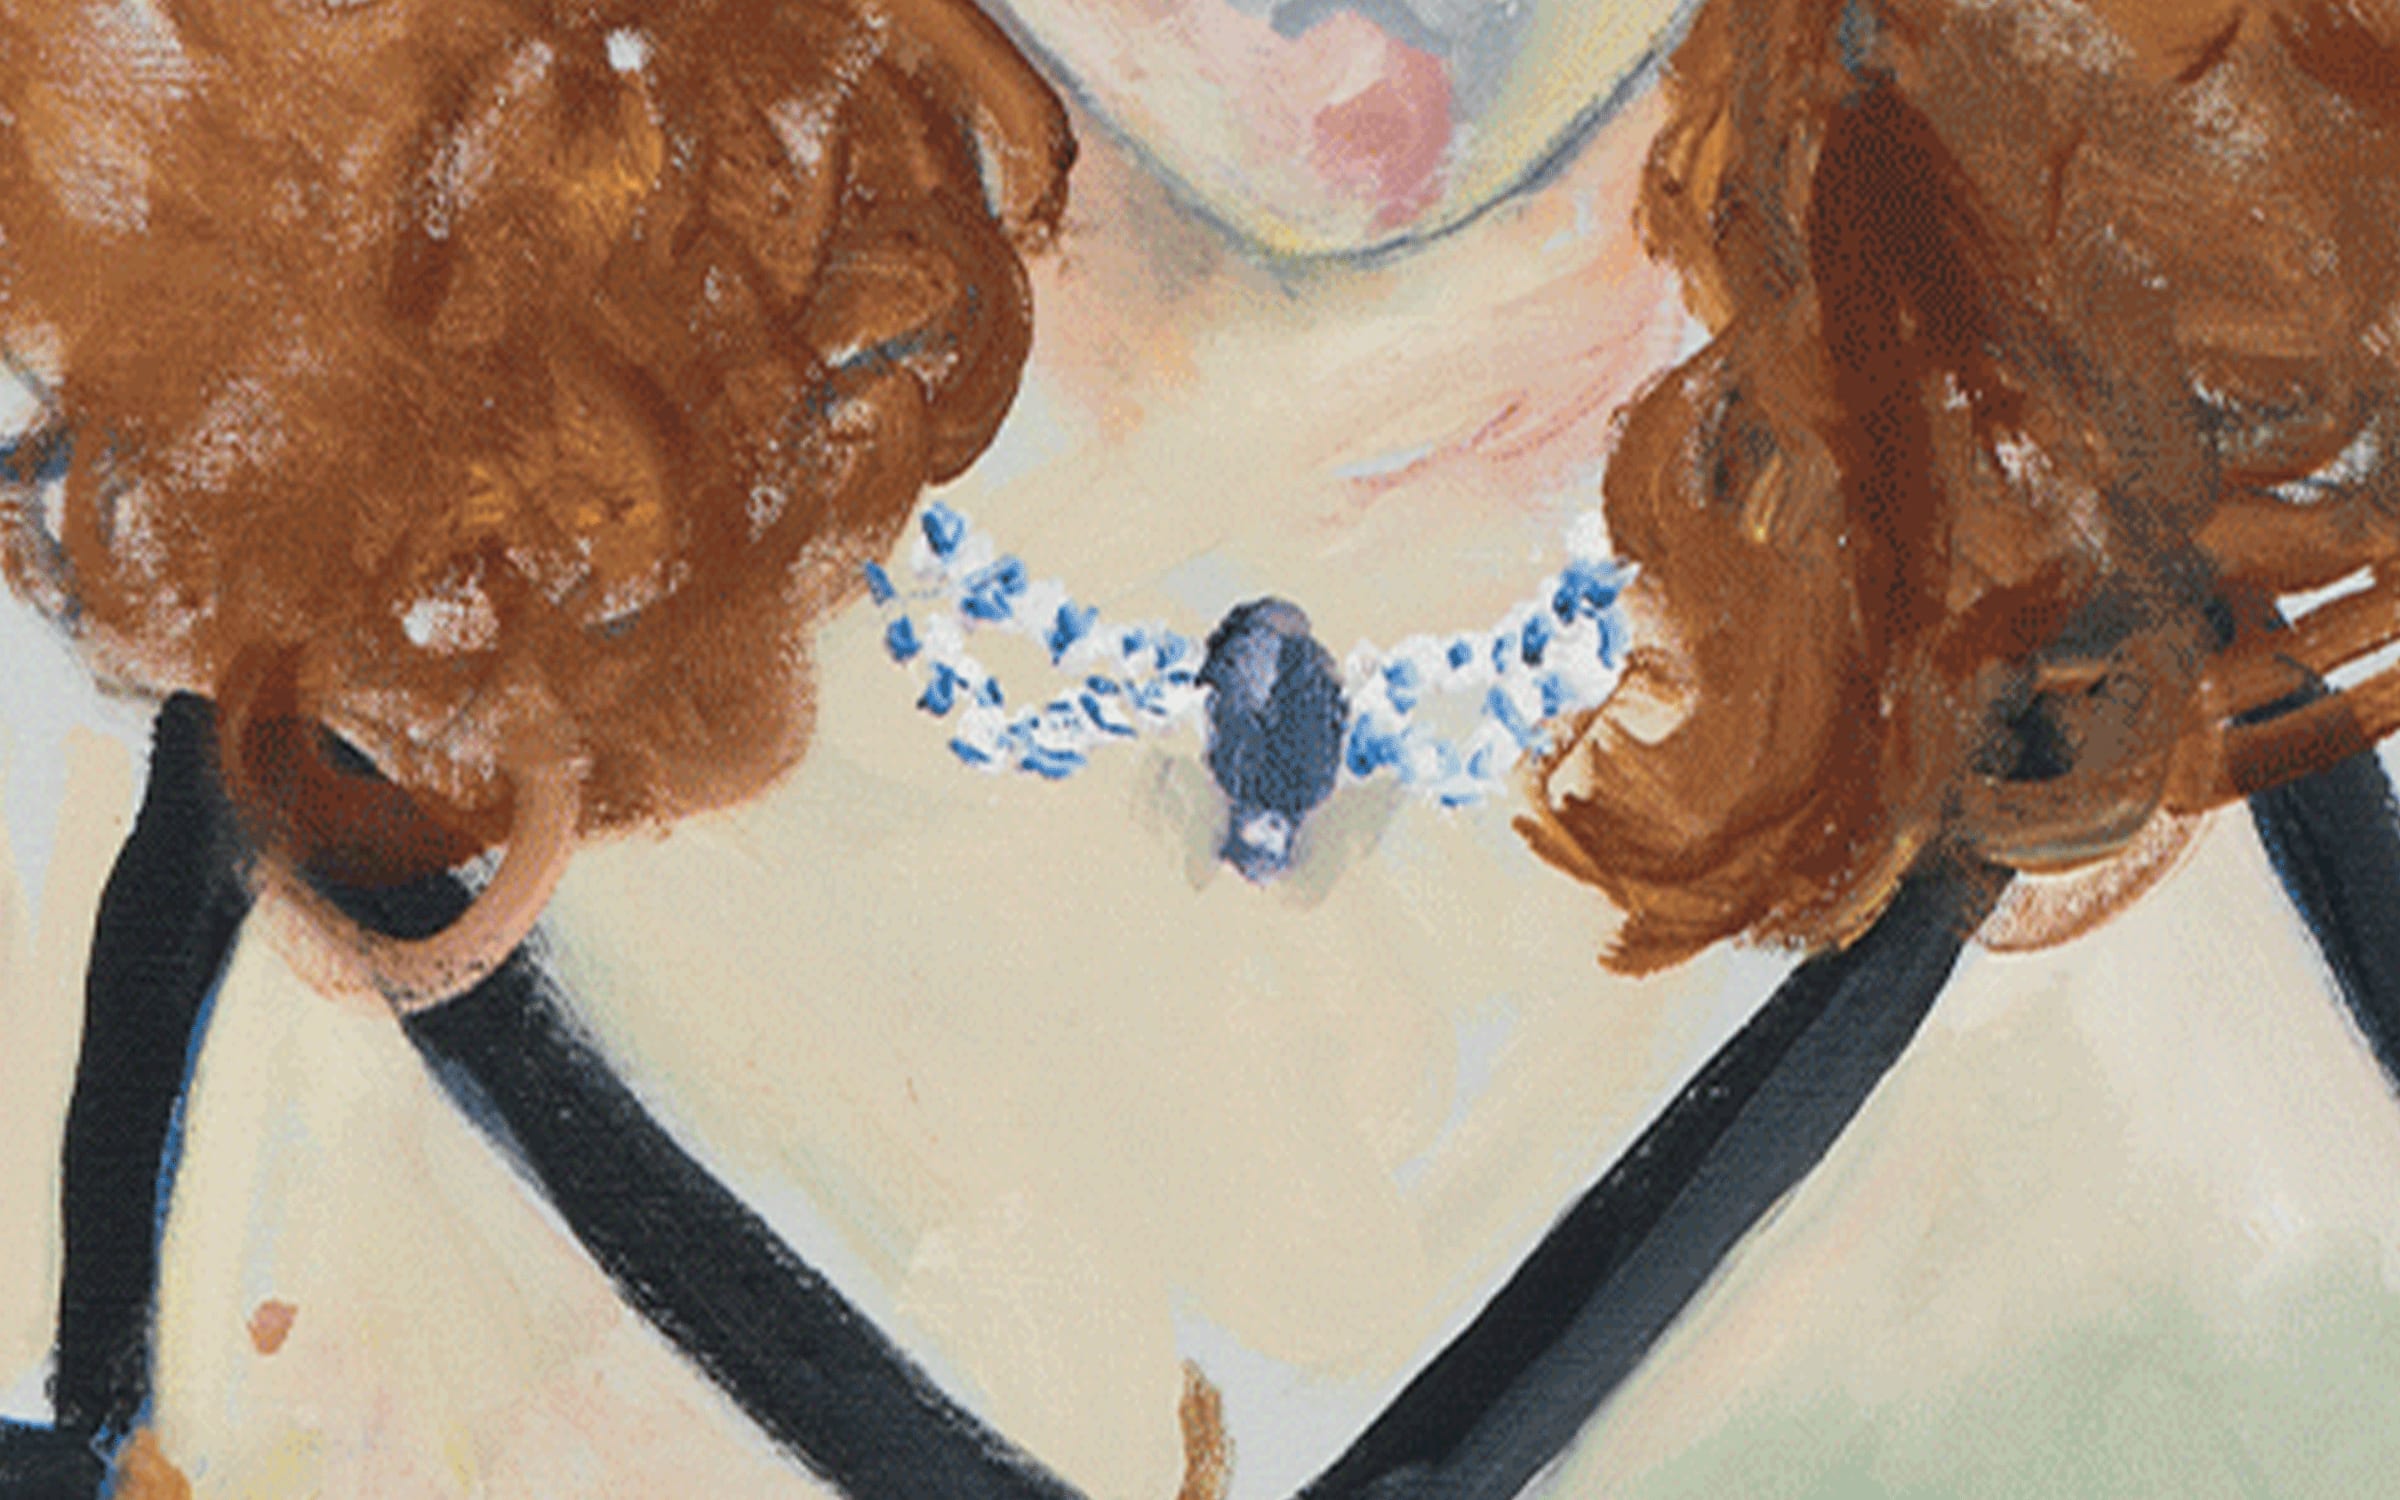 Alice Neel, Annie Sprinkle (detail), 1982. Private collection © The Estate of Alice Neel and David Zwirner. Photograph by Kerry McFate.